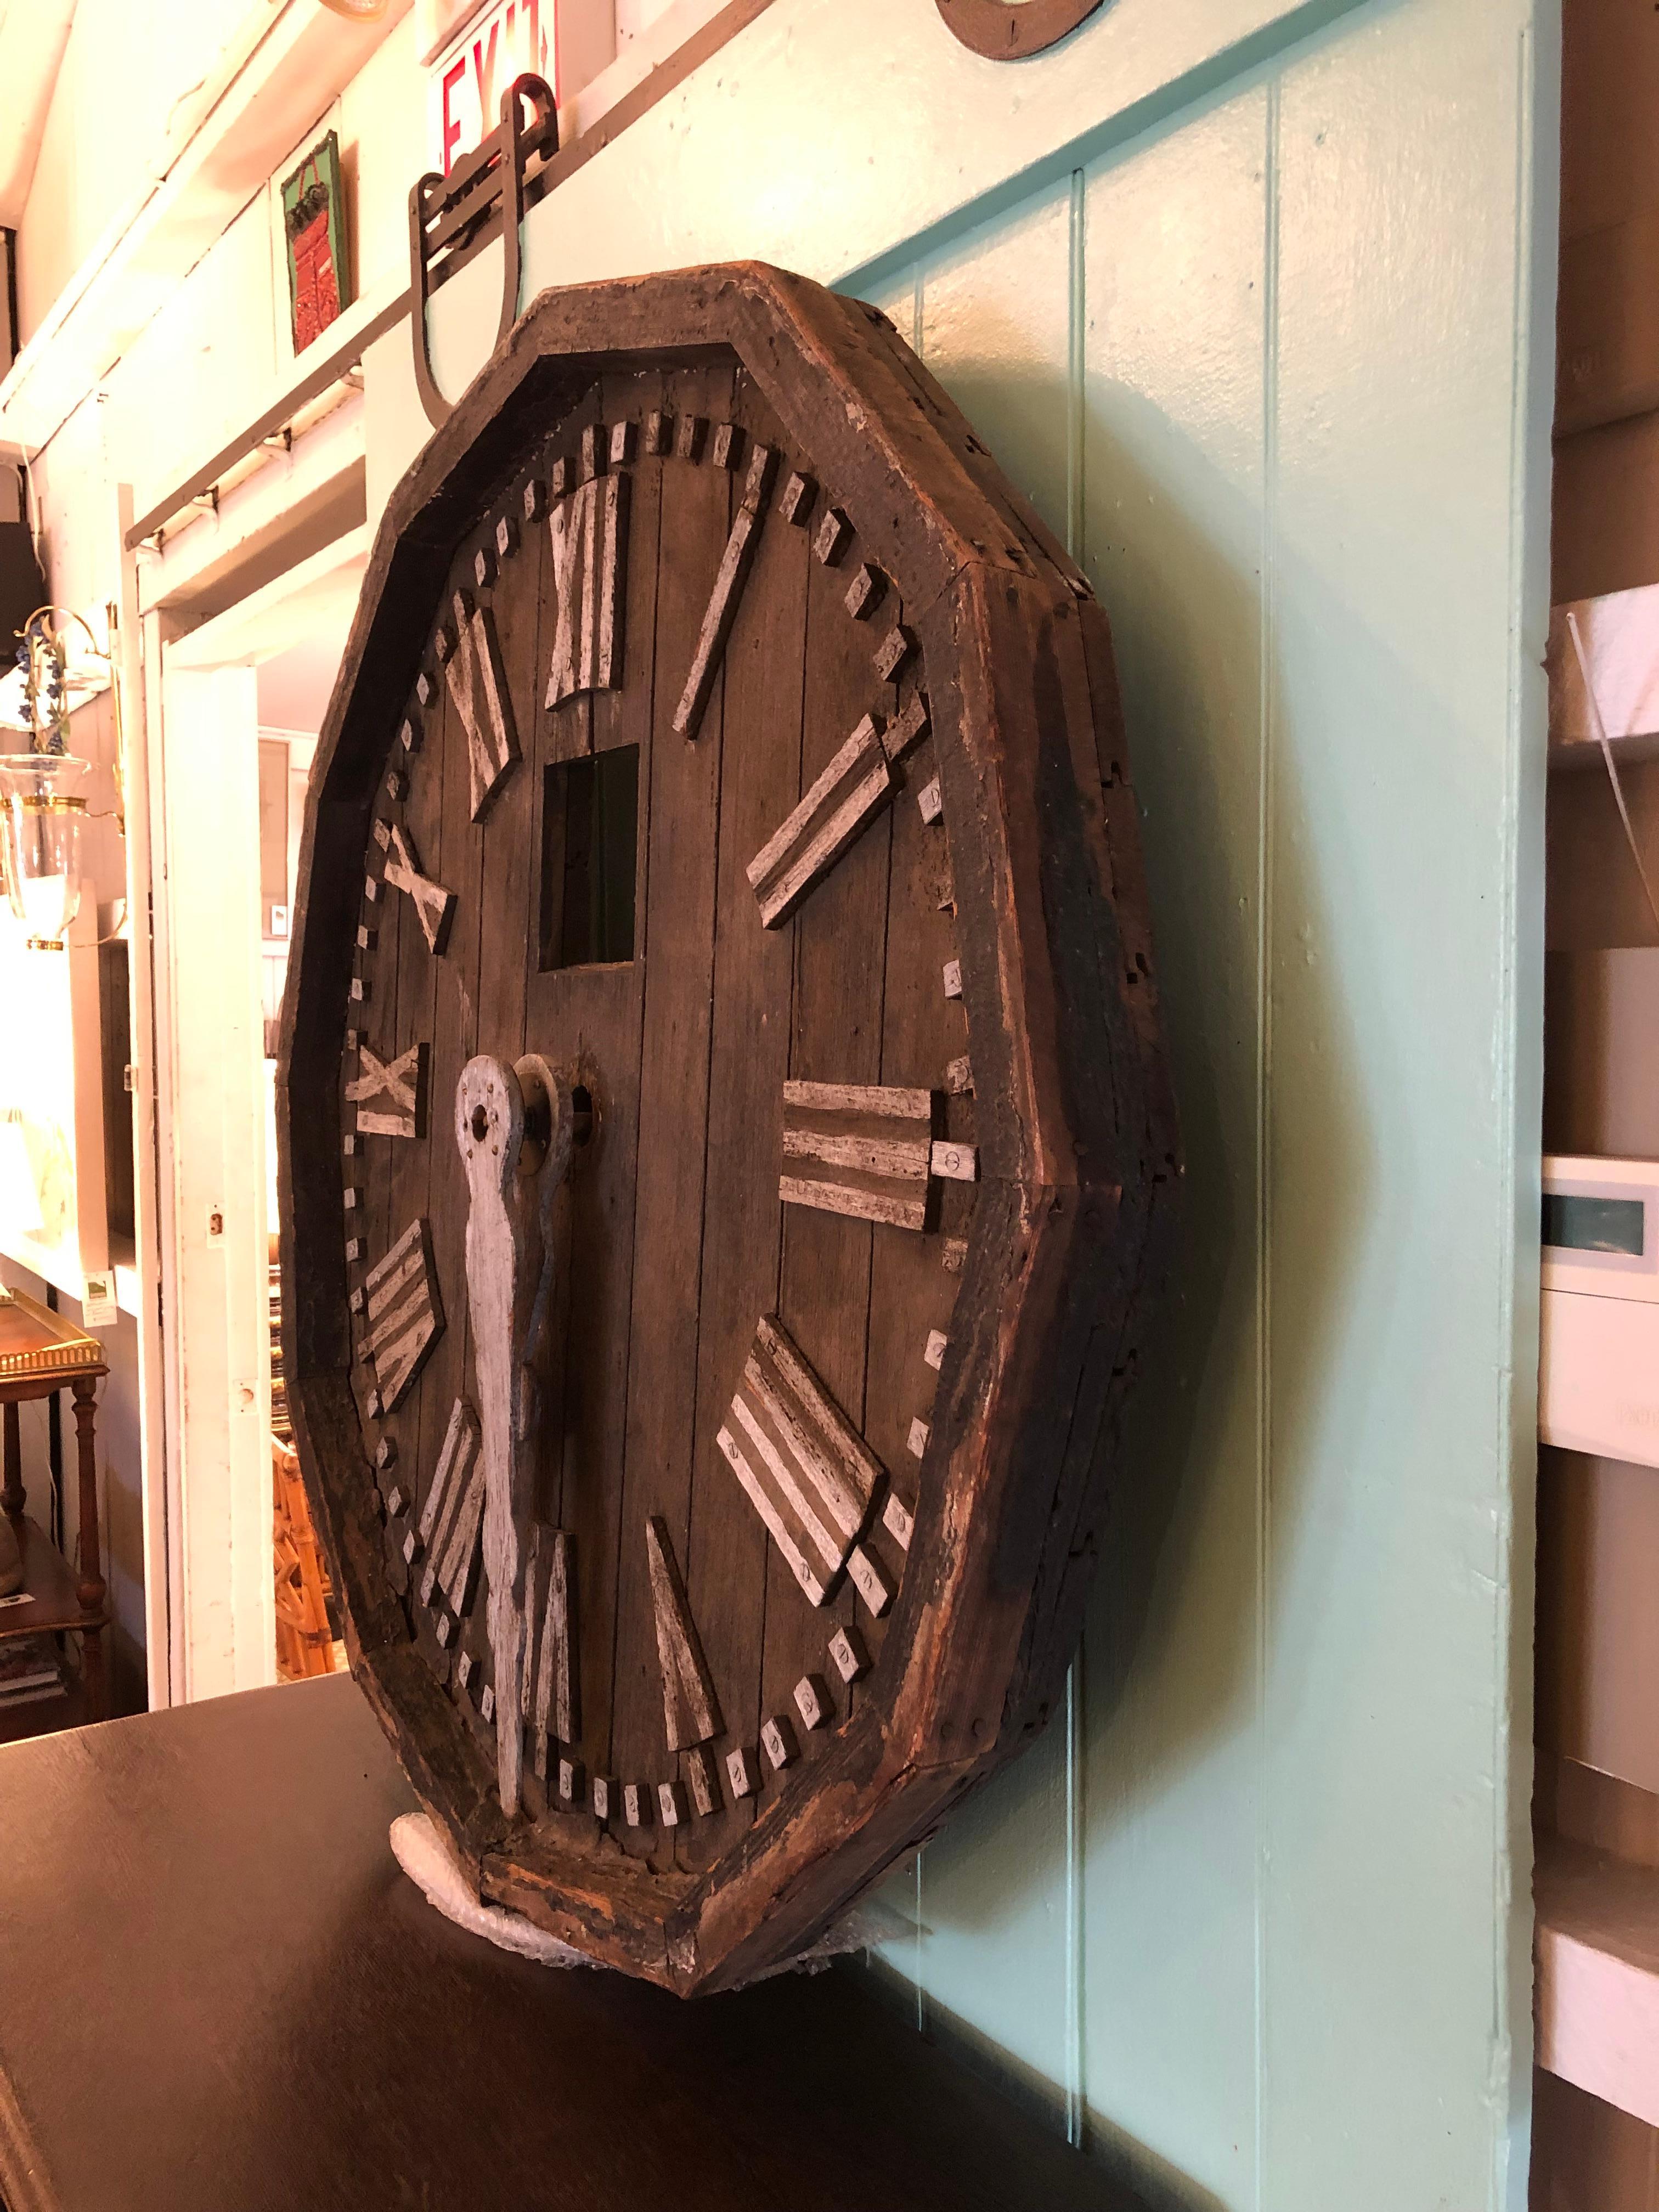 American Huge Antique Distressed Reclaimed Wood Architectural Fragment Clock Face For Sale